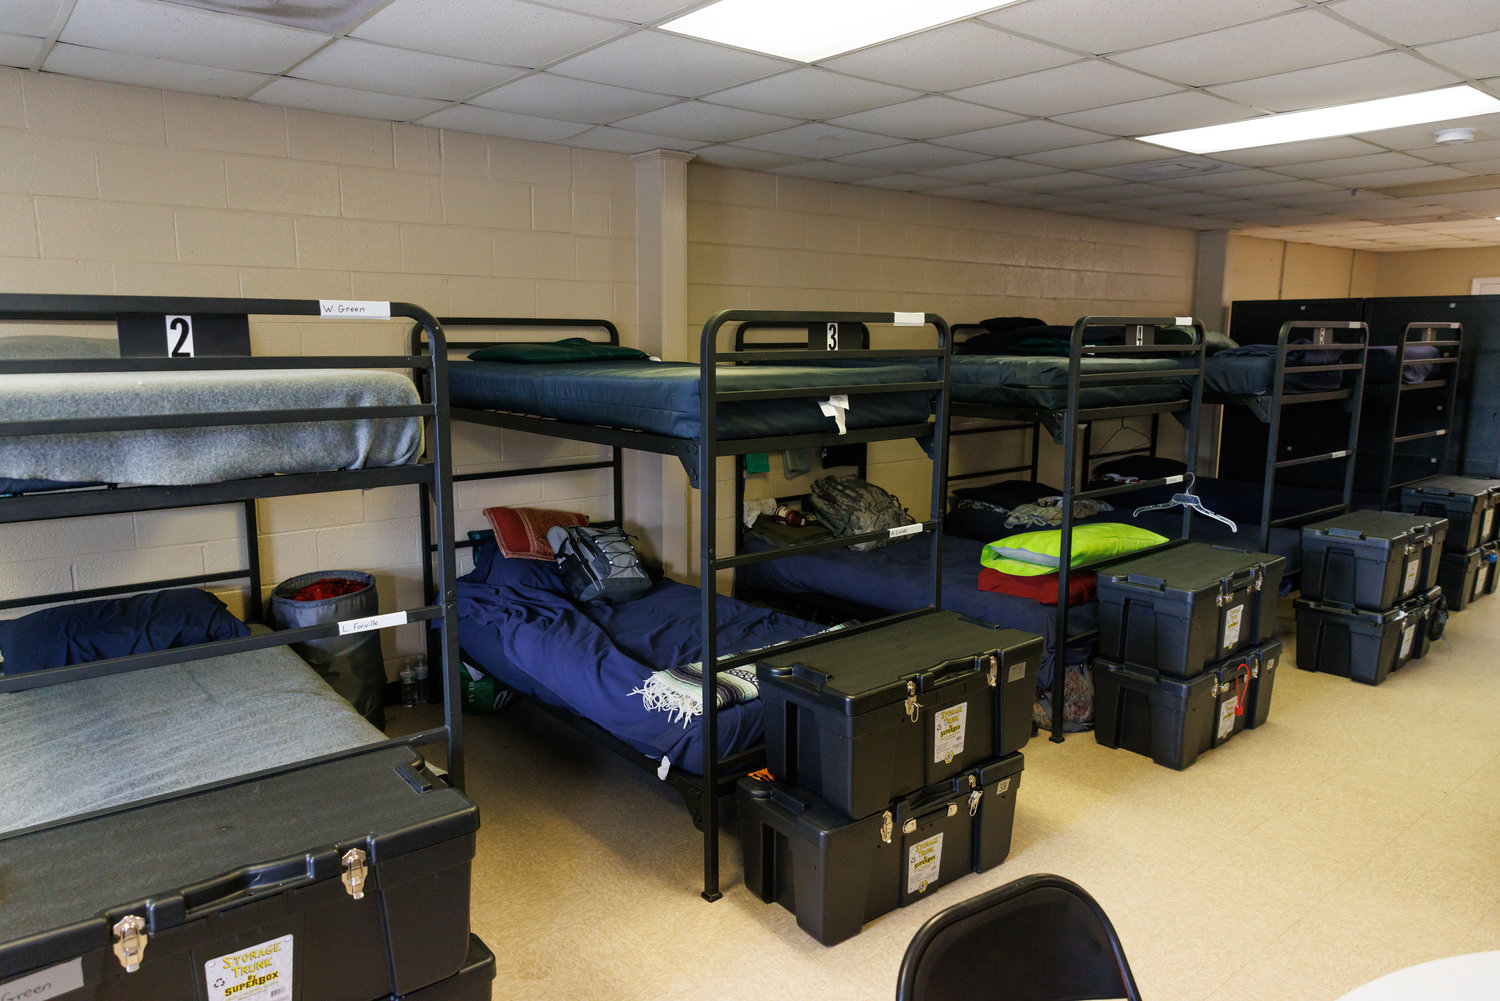 The Manna Dream Center Shelter has 10 bunk beds that sleep 20 people.